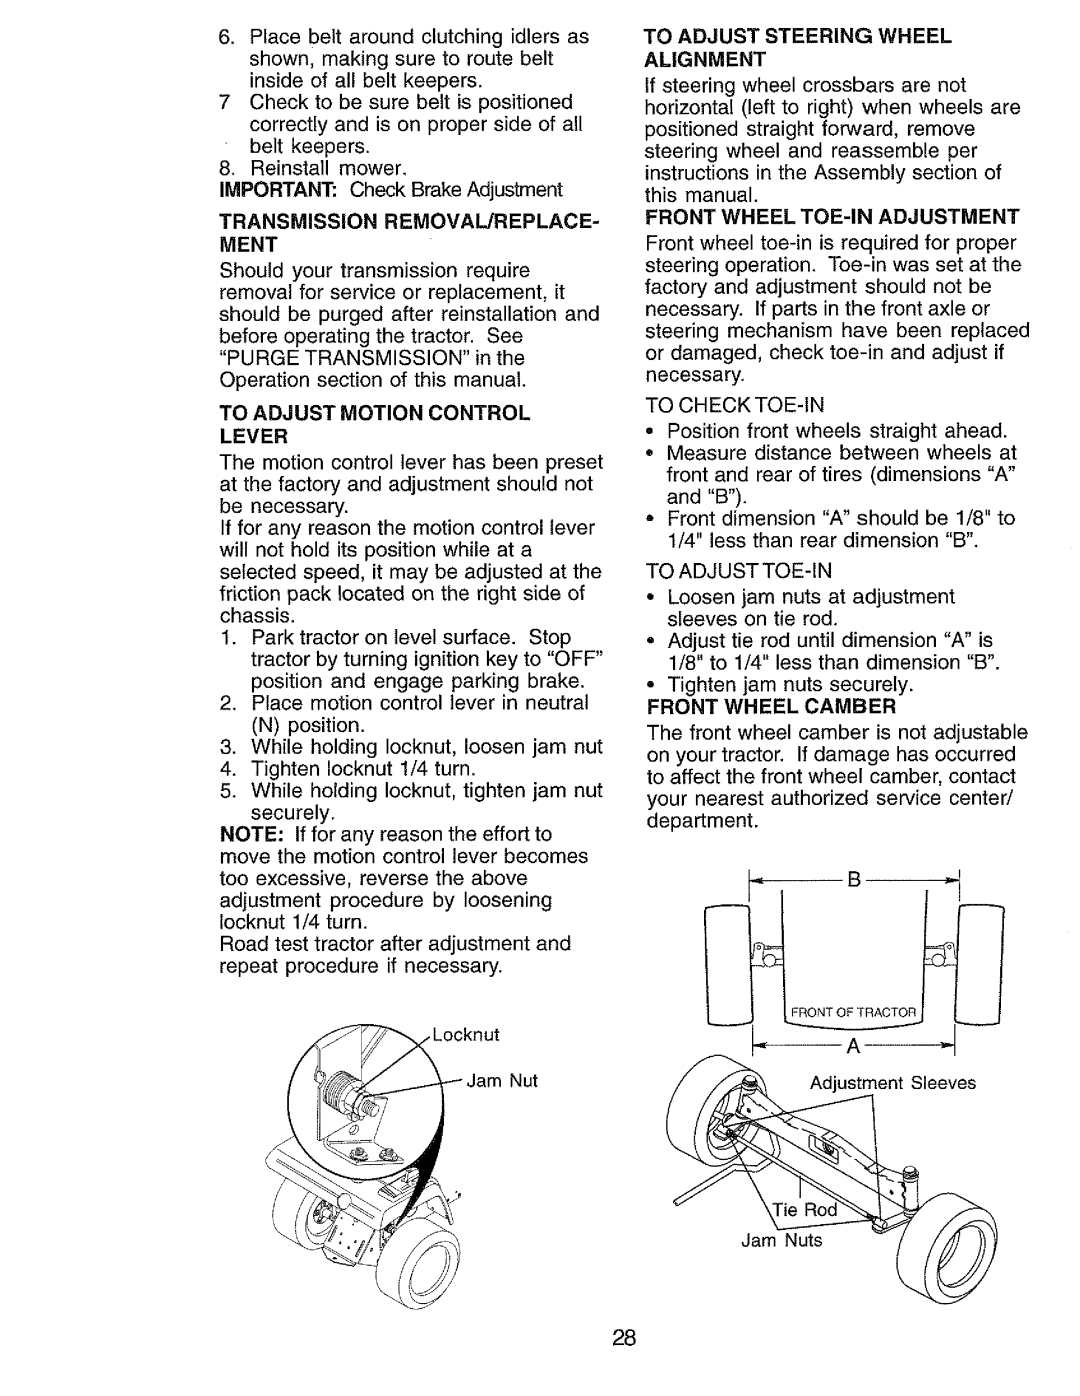 Craftsman 917.273062 Transmission REMOVAL/REPLACE- Ment, To Adjust Motion Control Lever, Front Wheel TOE-INADJUSTMENT 